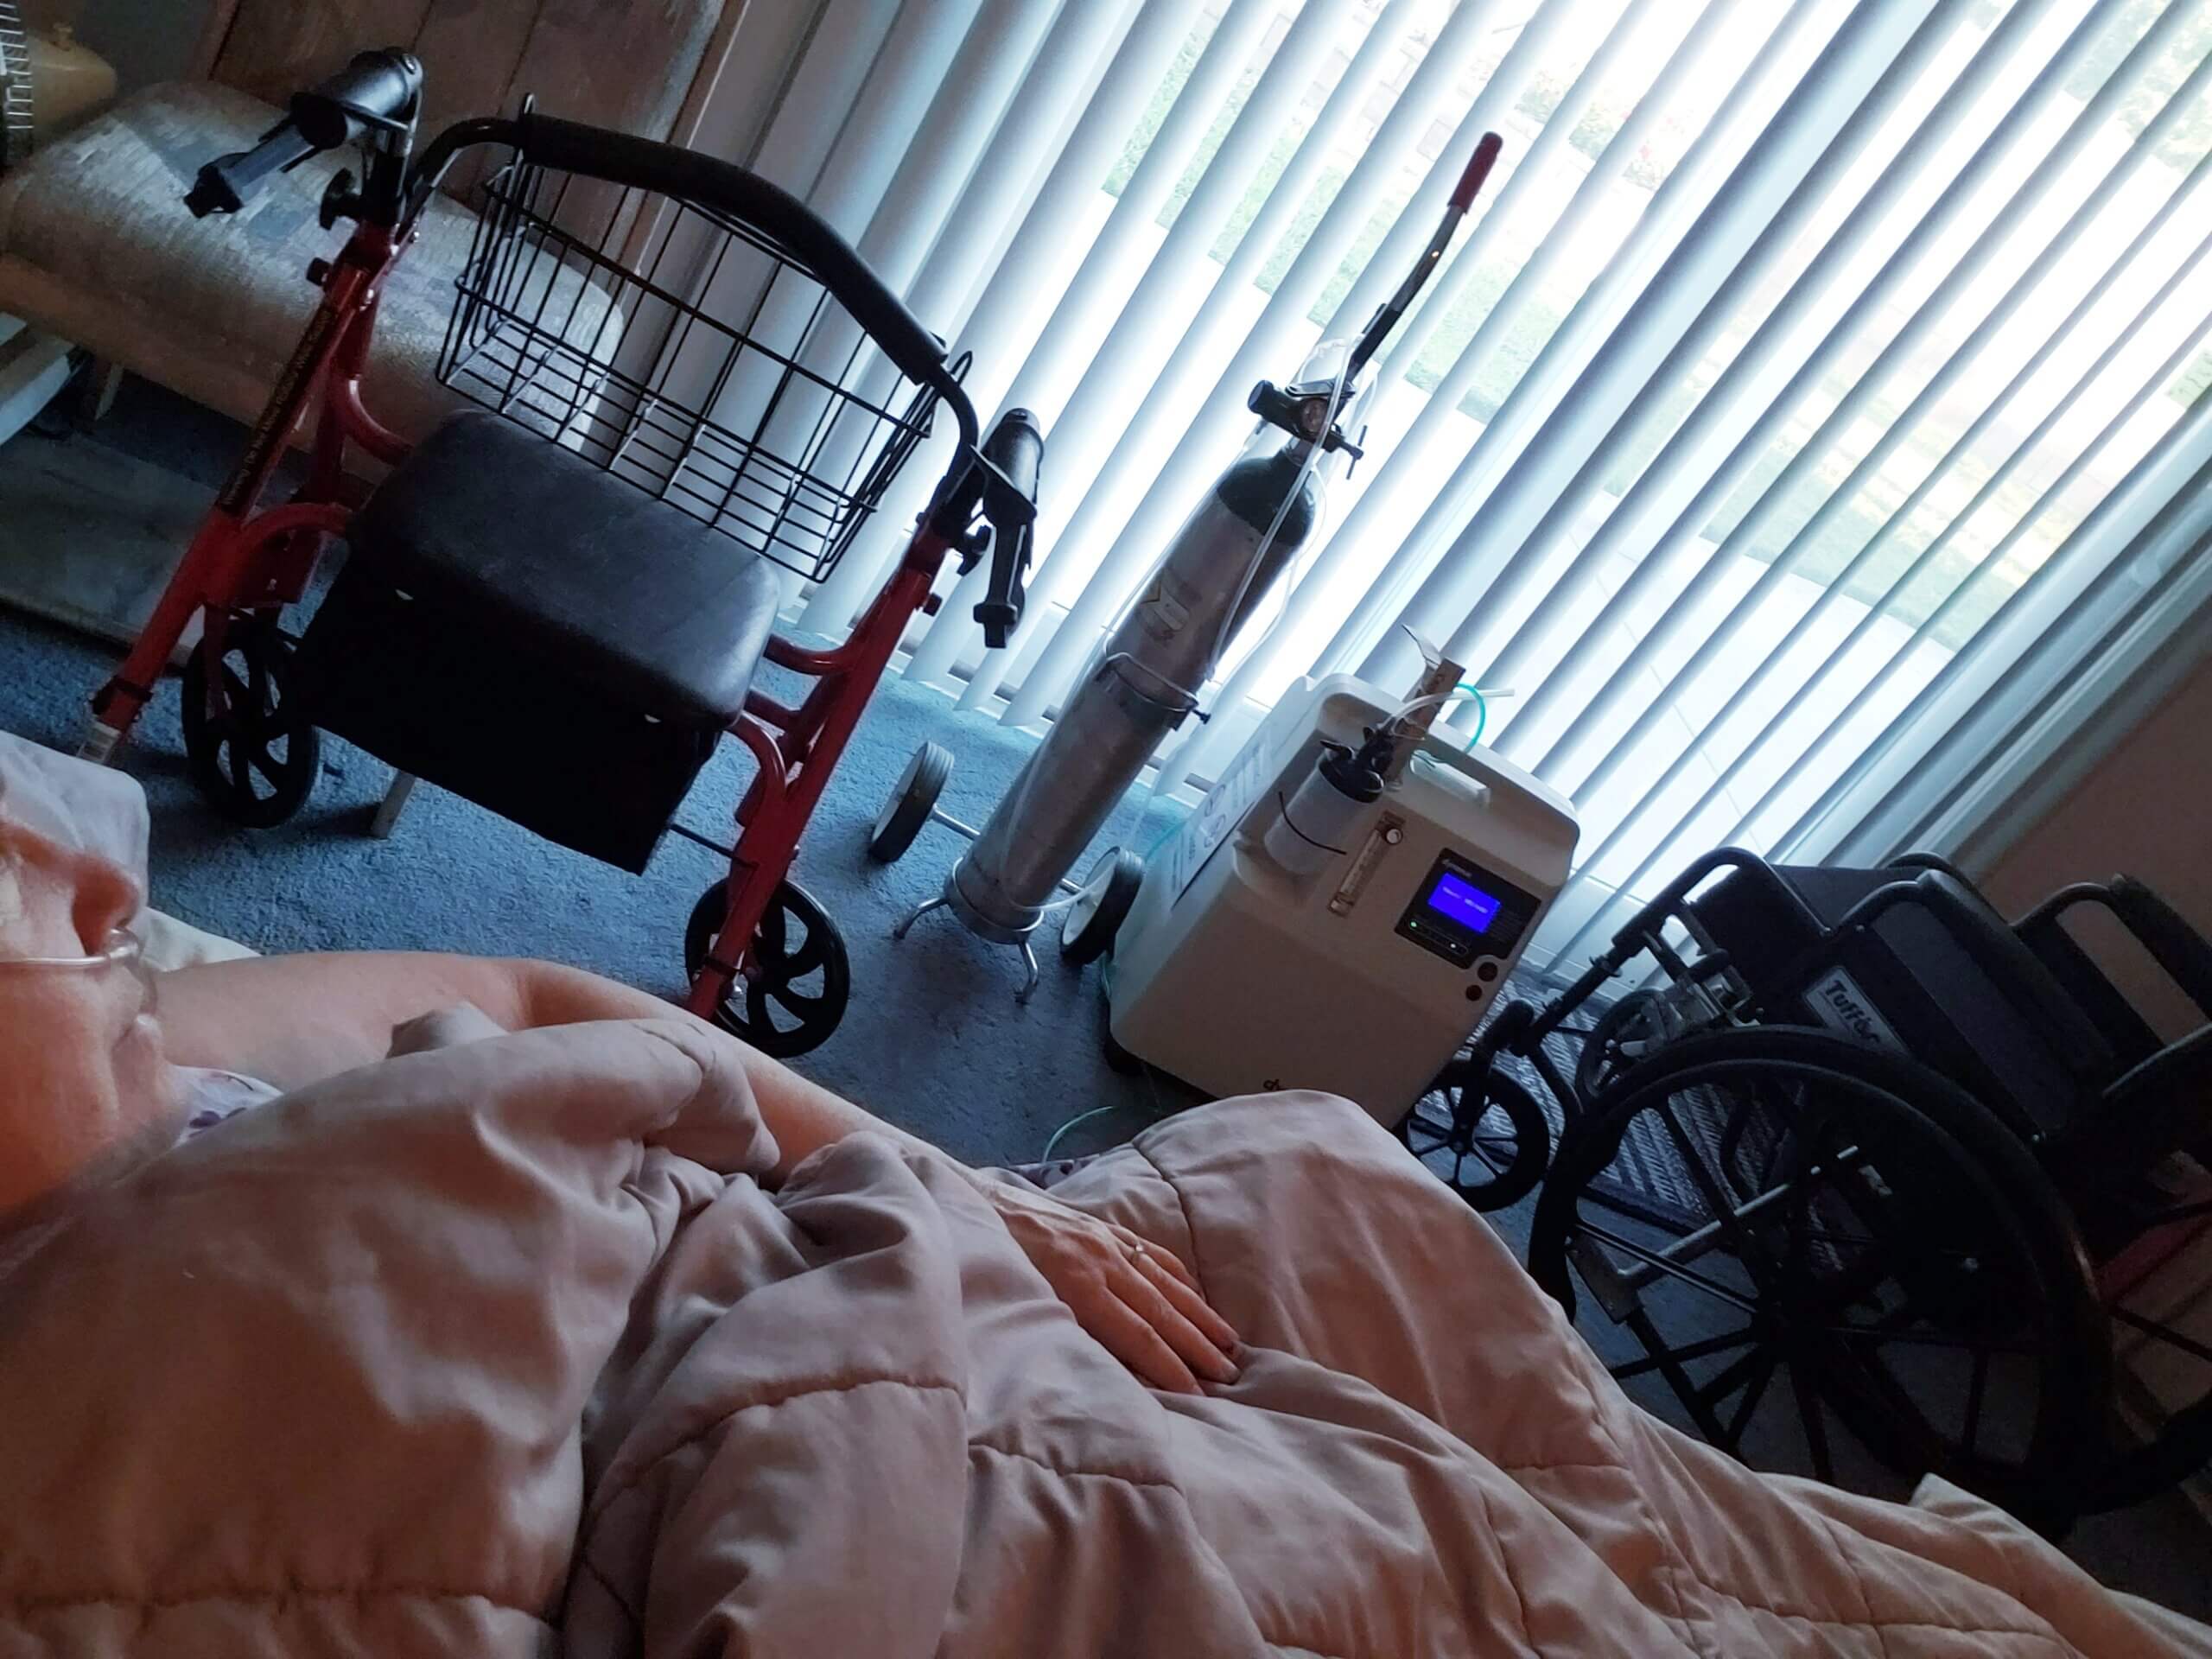 A photo of someone's walker, oxygen tank, wheelchair, and window